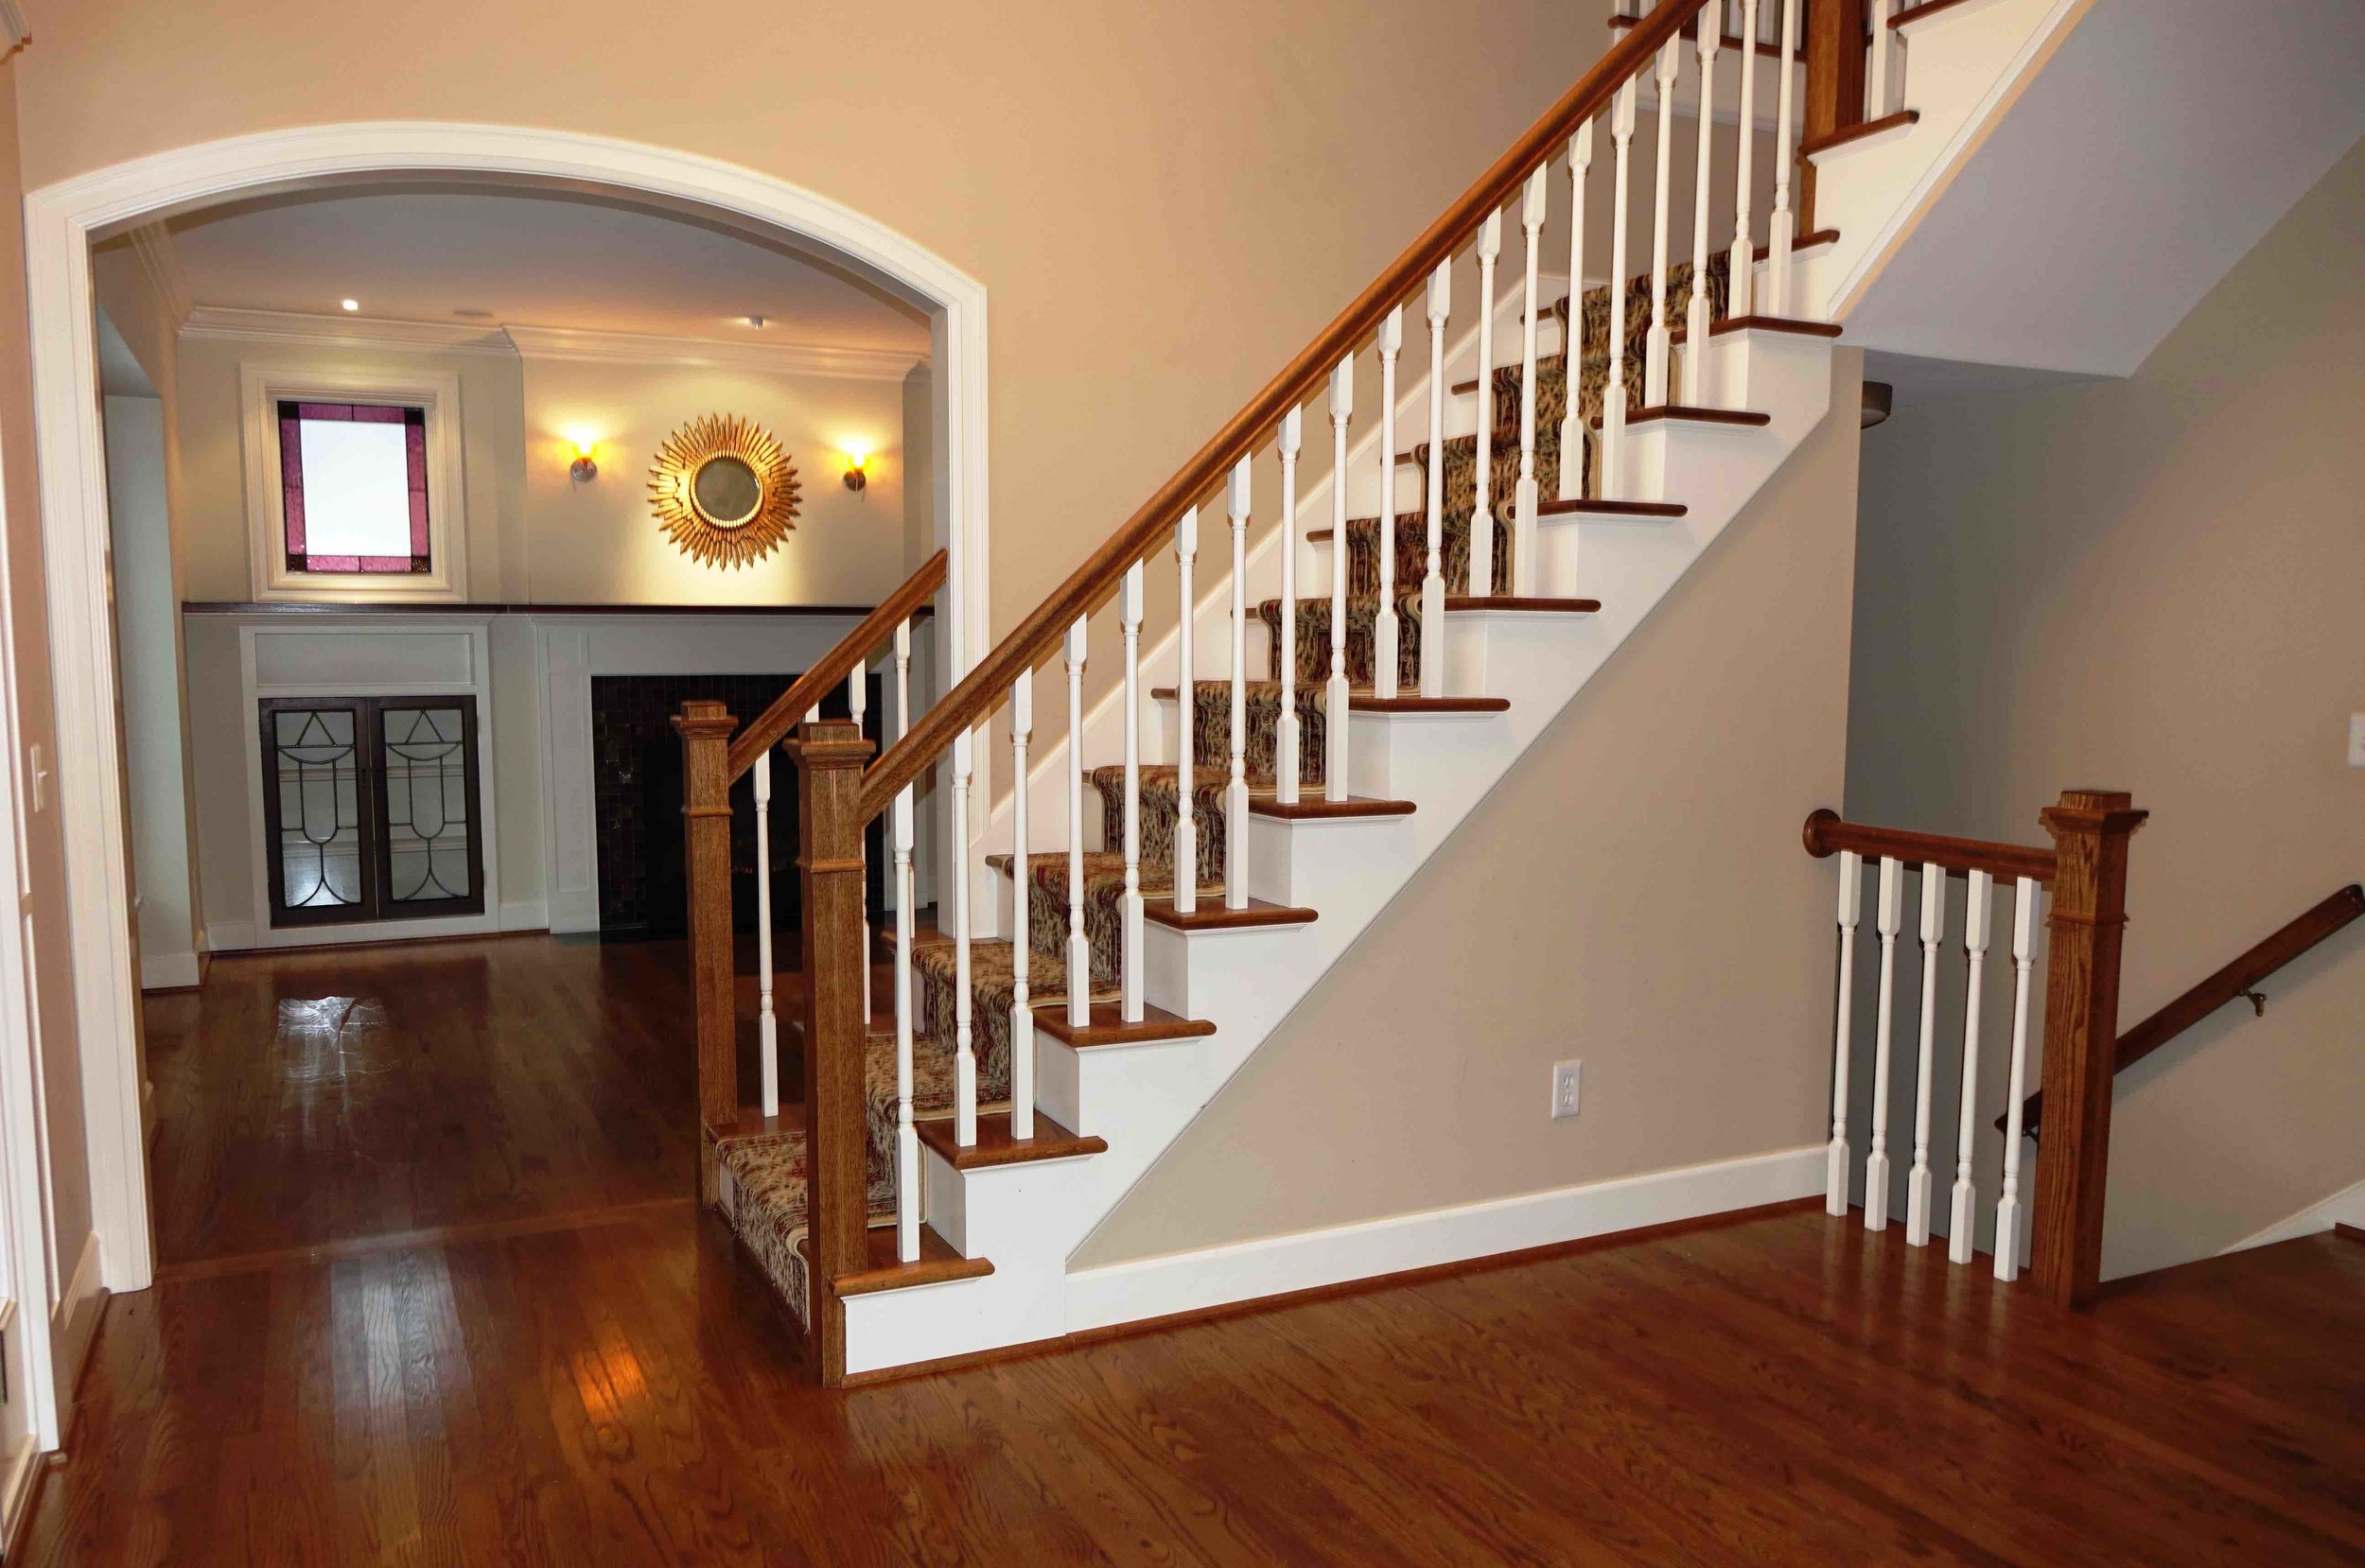 01425 - CROPPED - TWO STORY FOYER - 7857 Royal Woods, Pittsford, NY.jpg